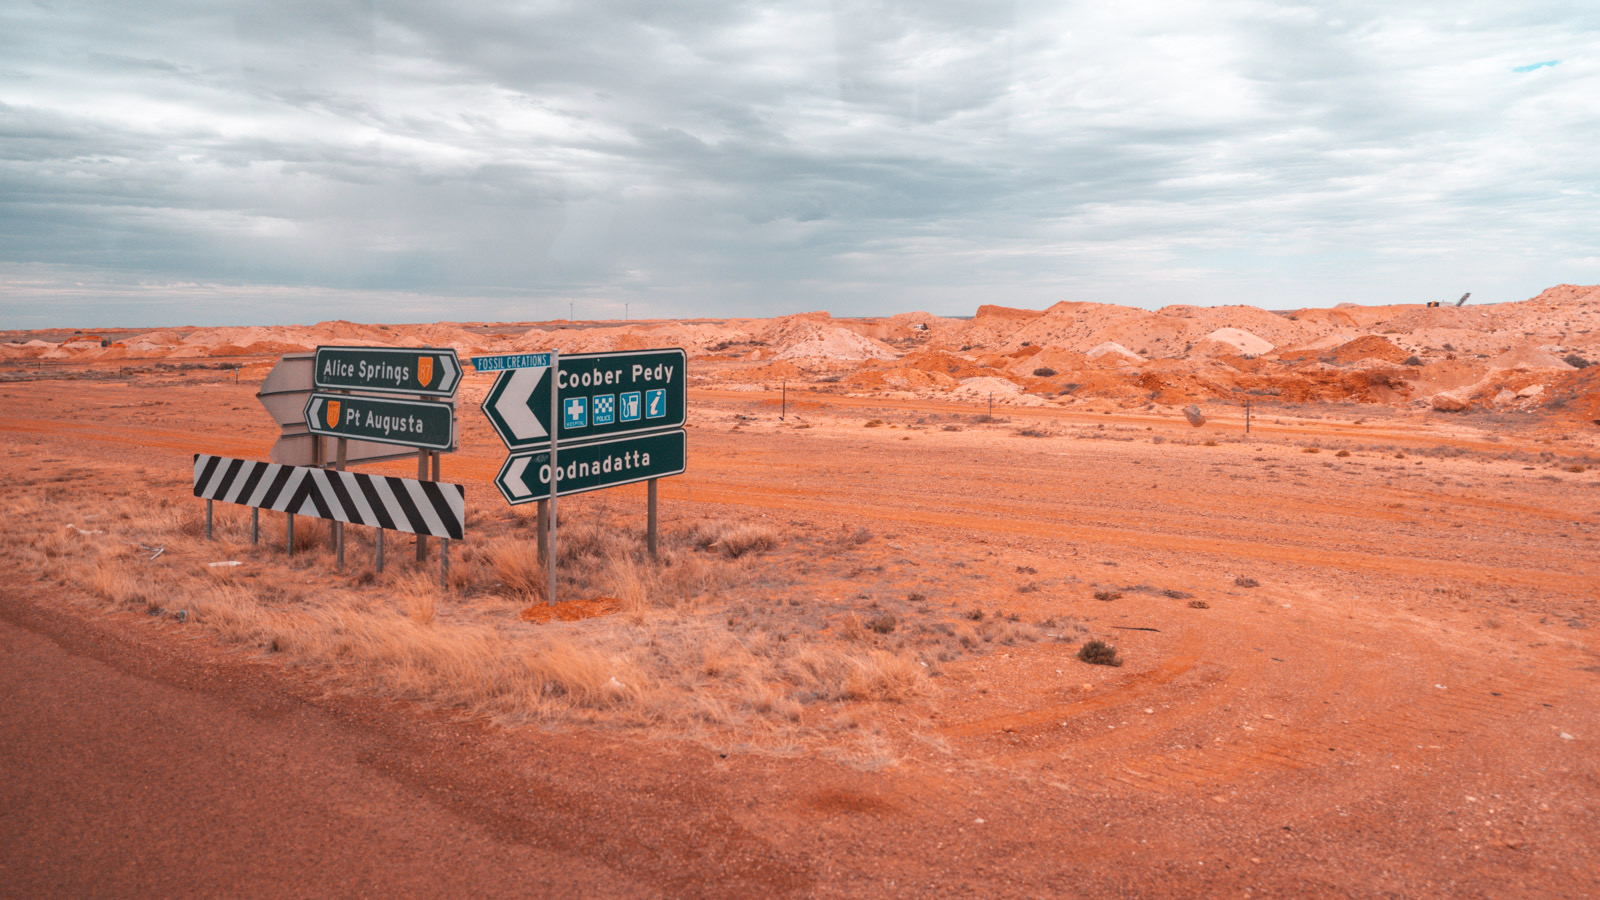 The road to Coober Pedy